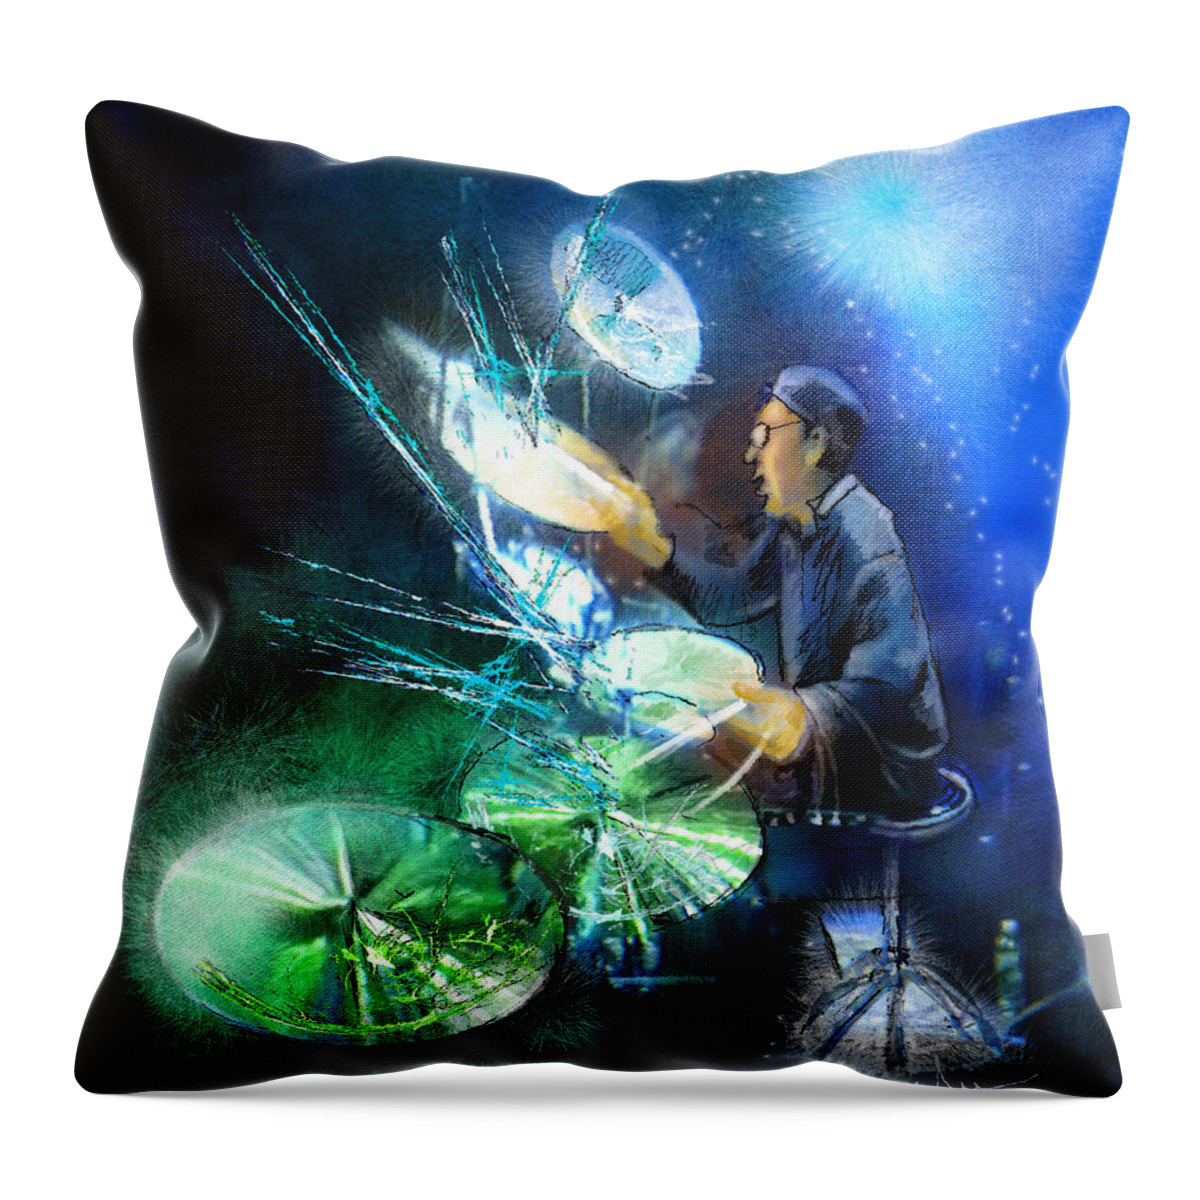 Drummer Throw Pillow featuring the painting The Drummer 01 by Miki De Goodaboom